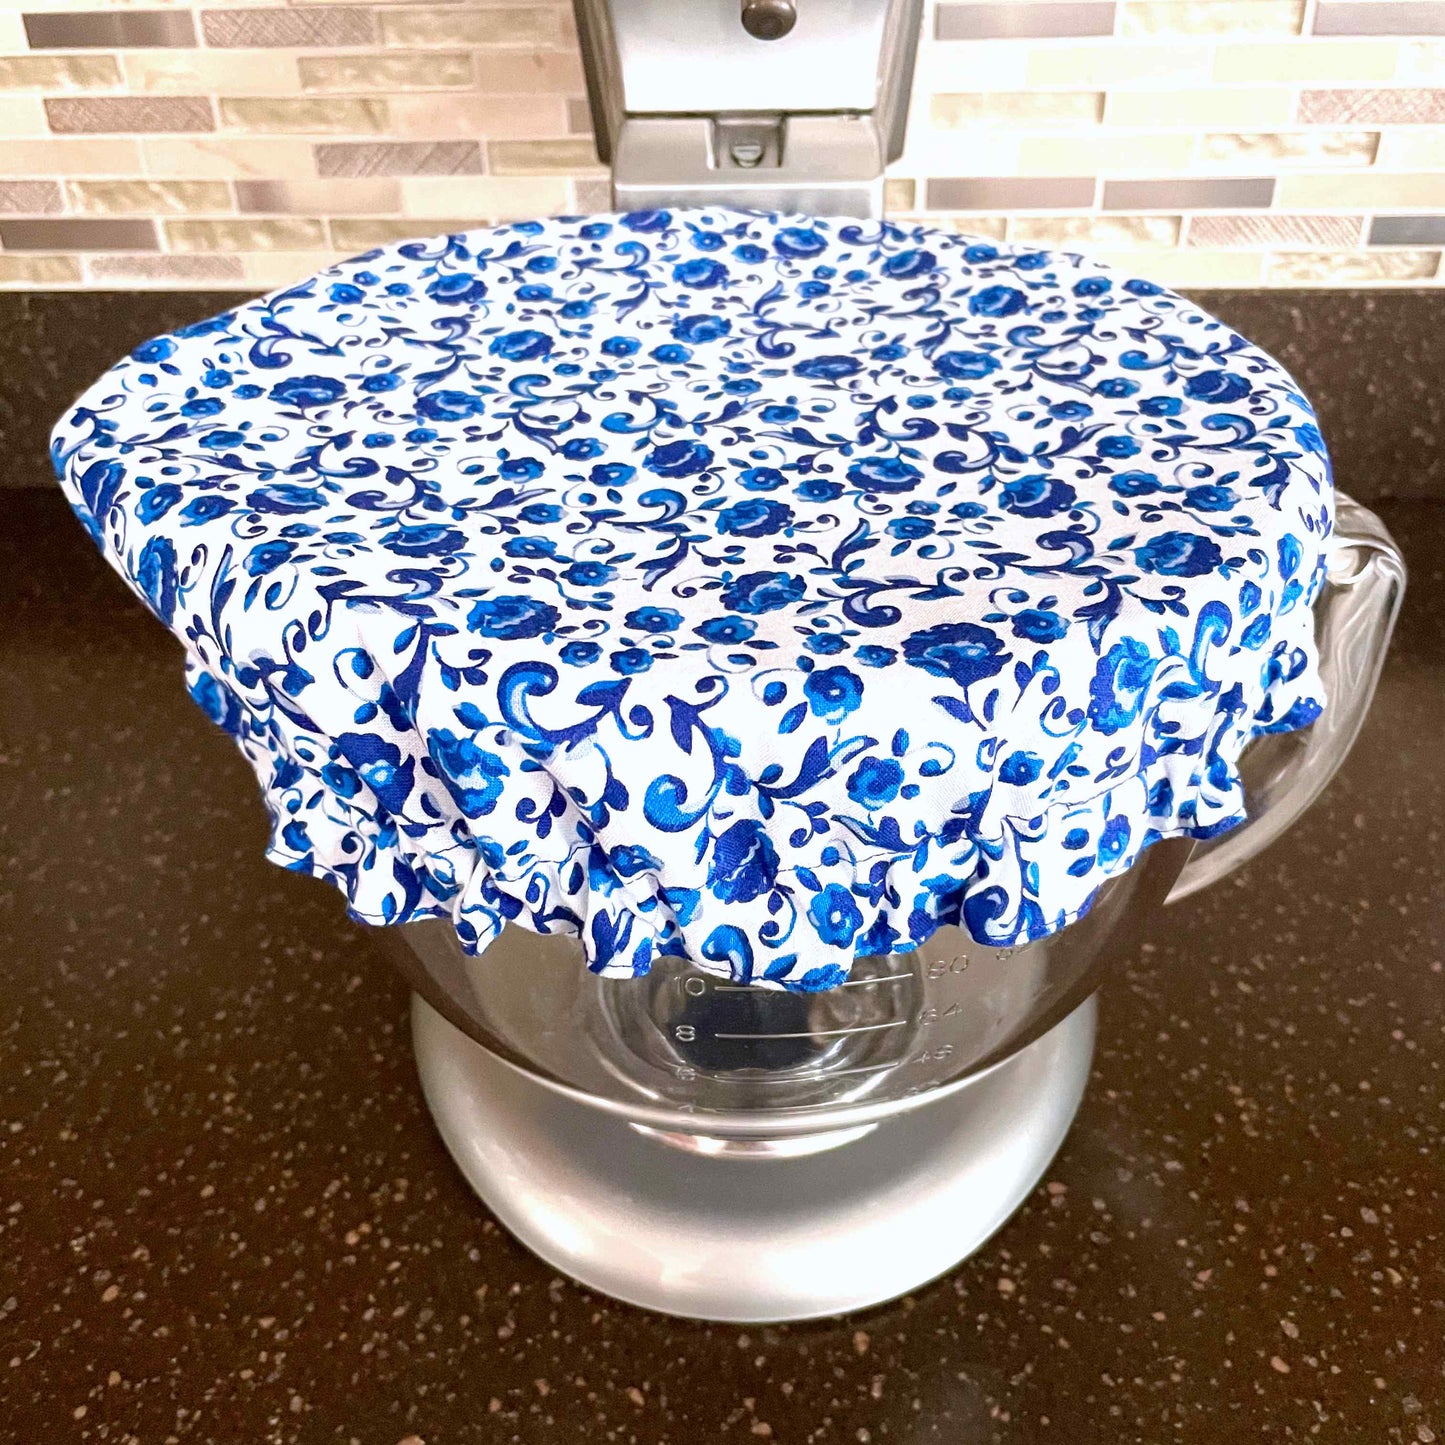 Stand Mixer Slider Mat | Pioneer Woman Scroll Floral | XL Mixer Bowl Cover